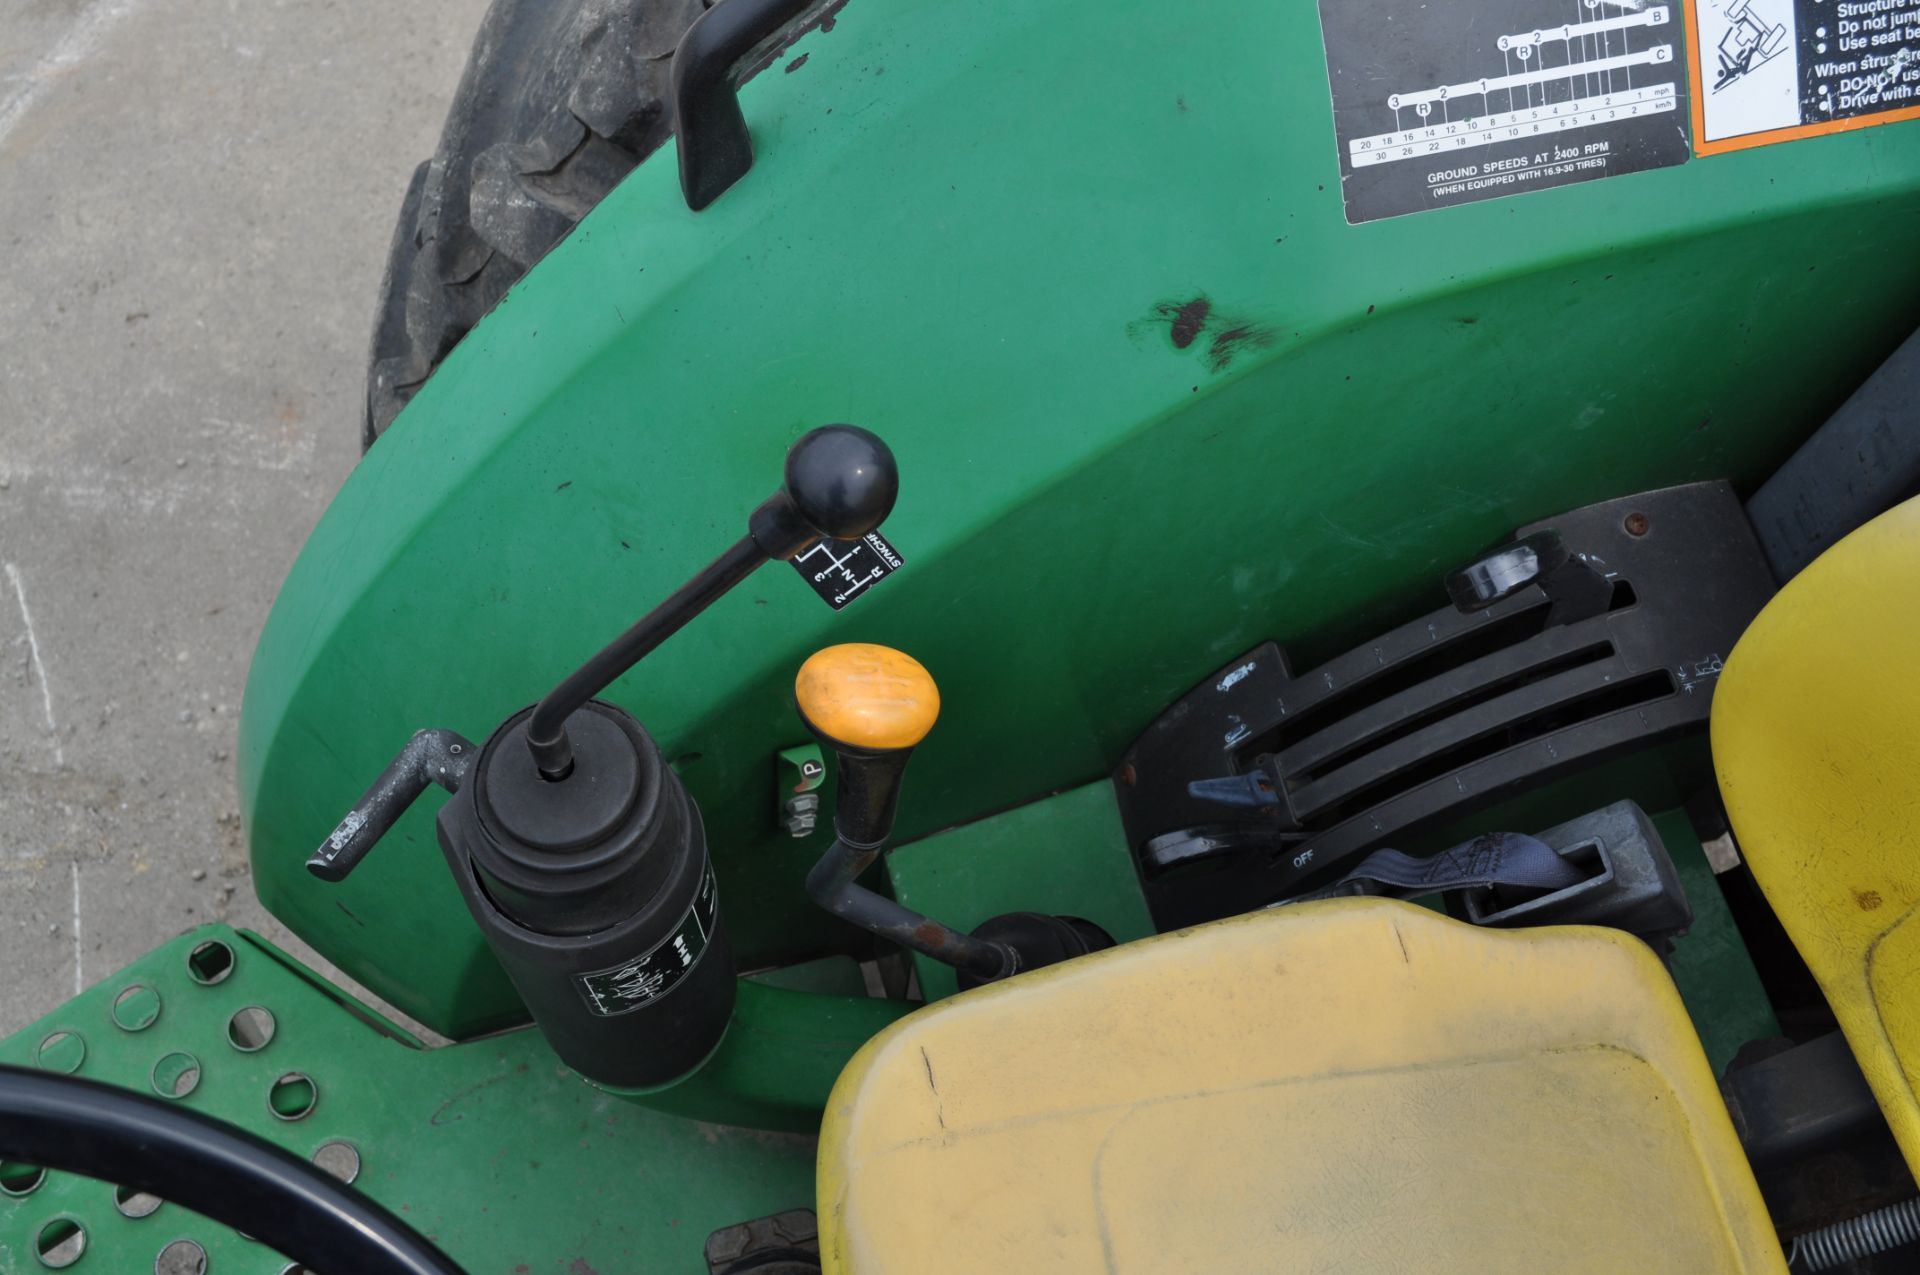 John Deere 5410 tractor, 2WD, w/ 520 loader, 16.9-30 rear tires, 11 L 15.5 front tires, 4090 hrs - Image 13 of 15